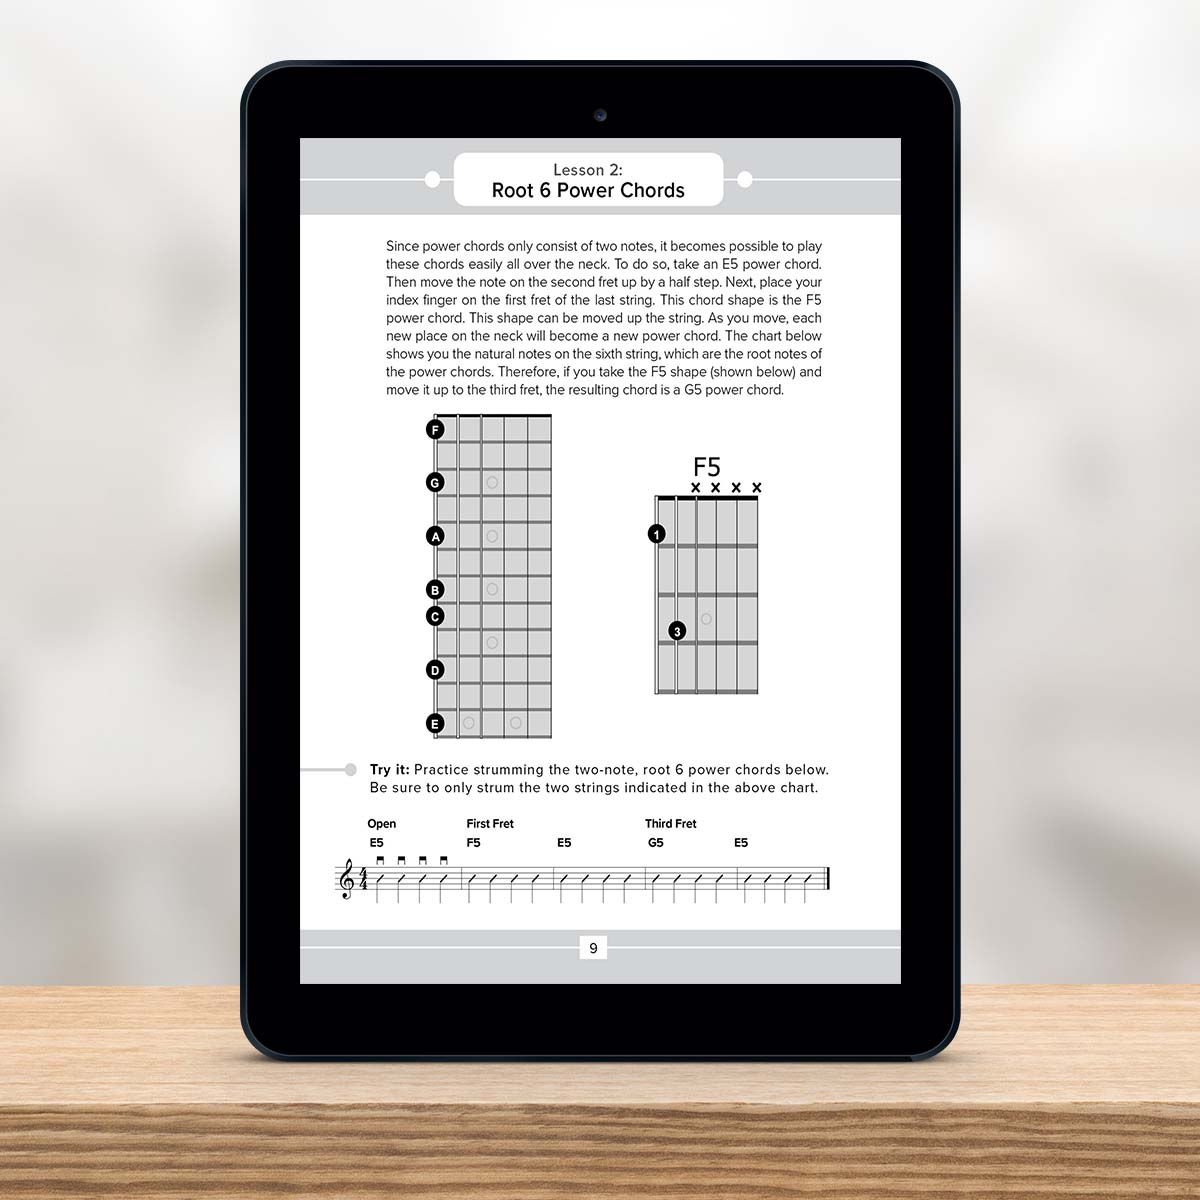 Digital Tablet showing a page from Guitar Chord Master Book 3 by Christian Triola